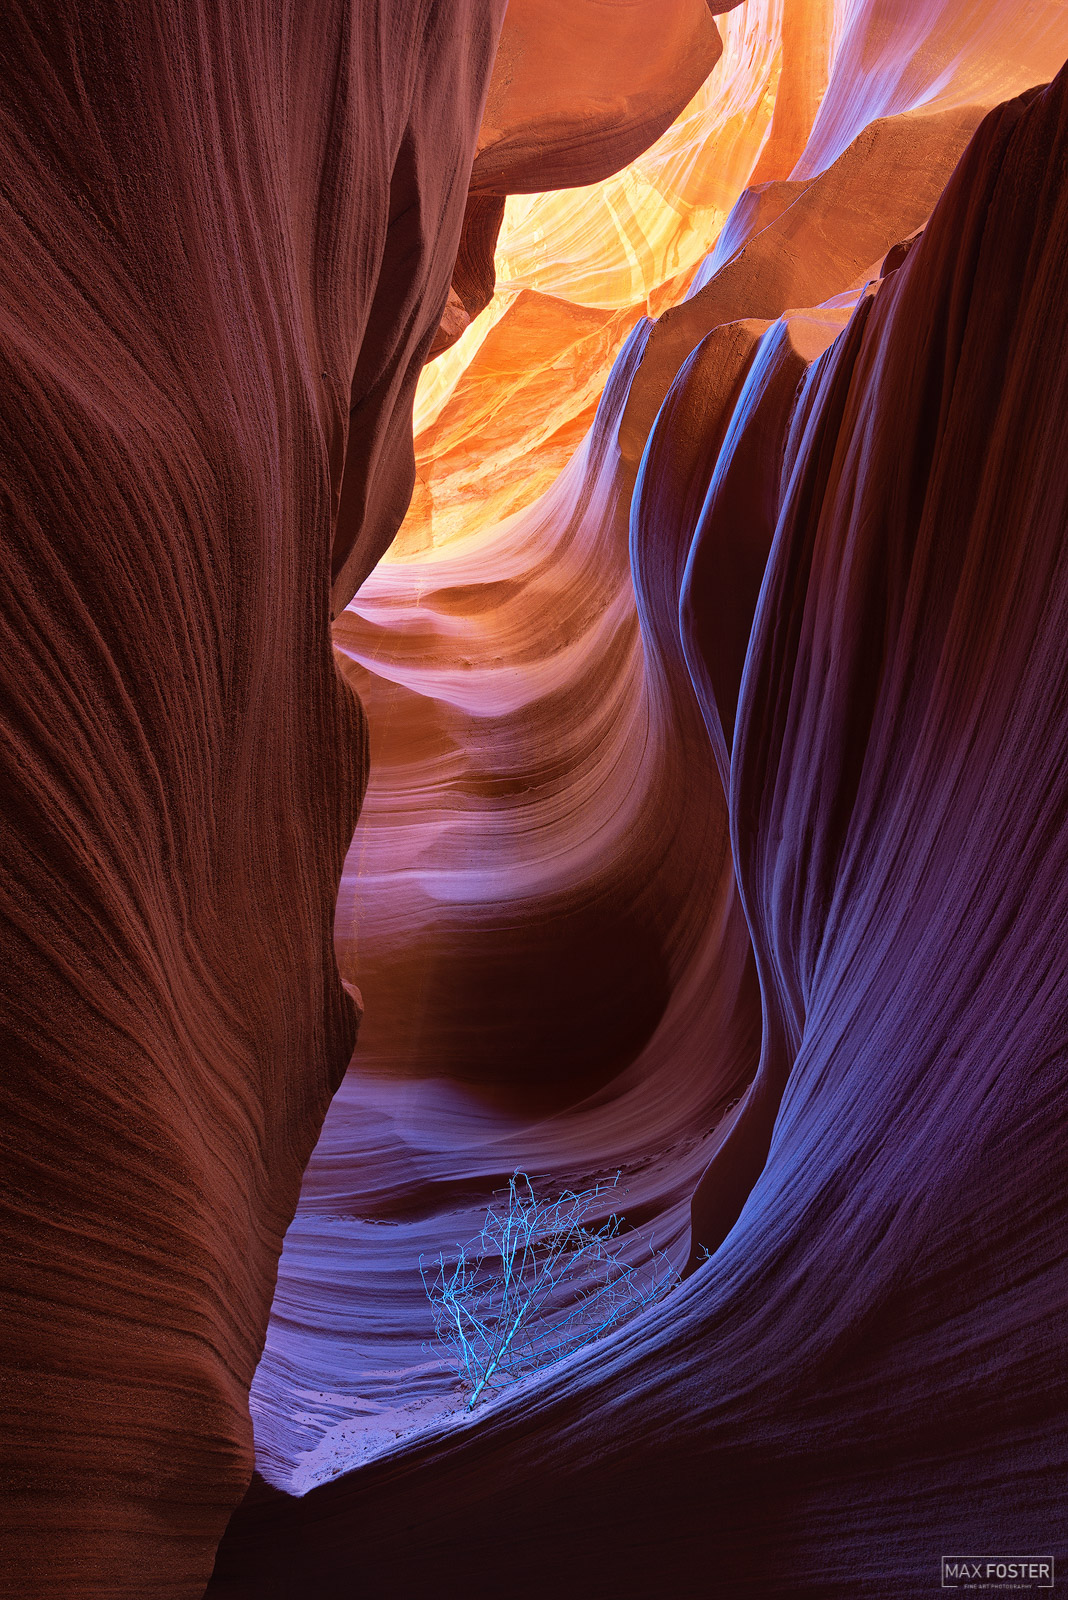 Bring nature into your home with Hidden Flame, Max Foster's limited edition photography print of a slot canyon in Page, Arizona...